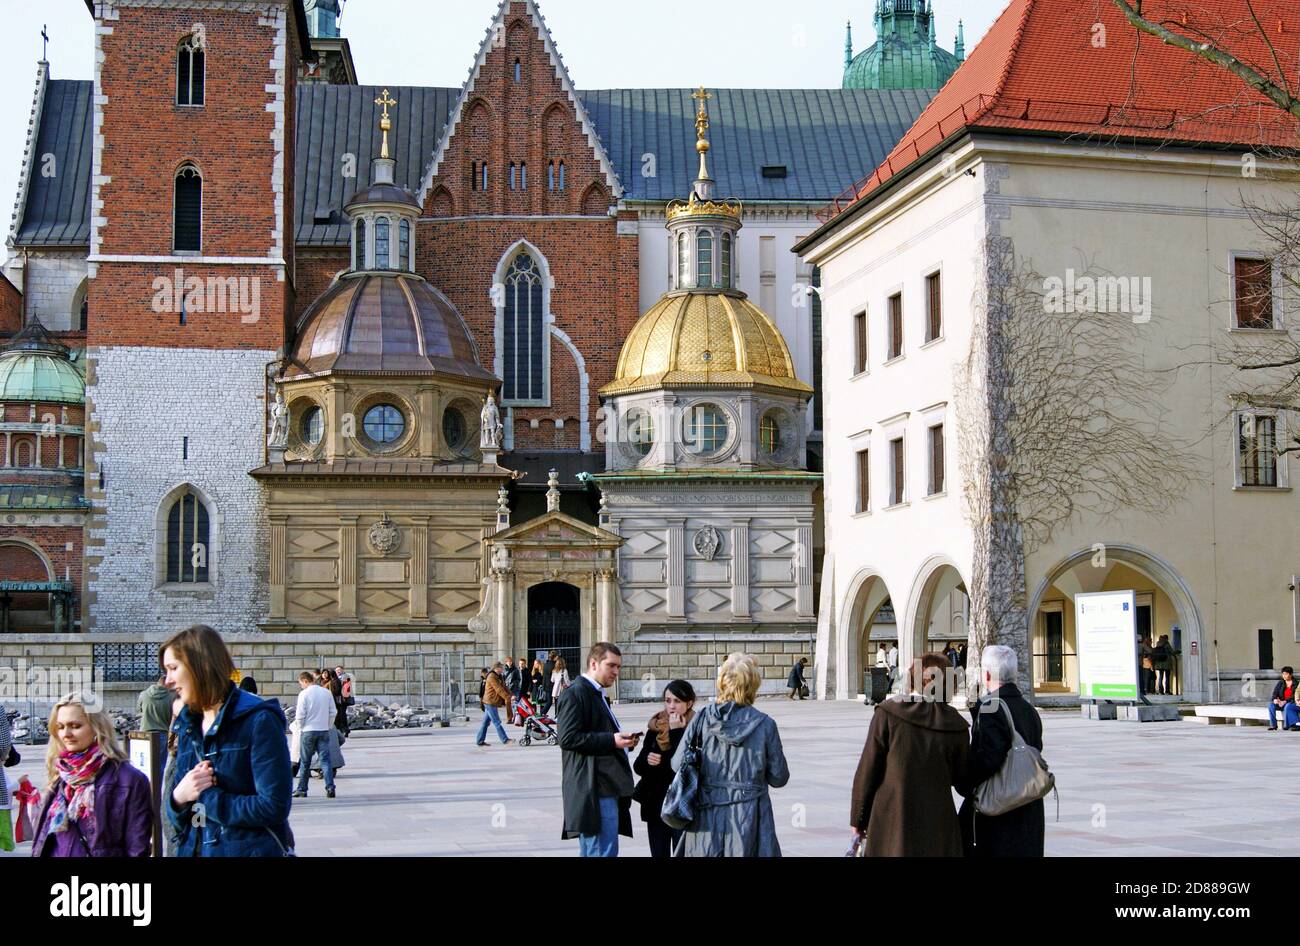 Wawel Royal Castle in Krakow, Poland, is a residency, museum, and cathedral of varying architectural styles. Stock Photo